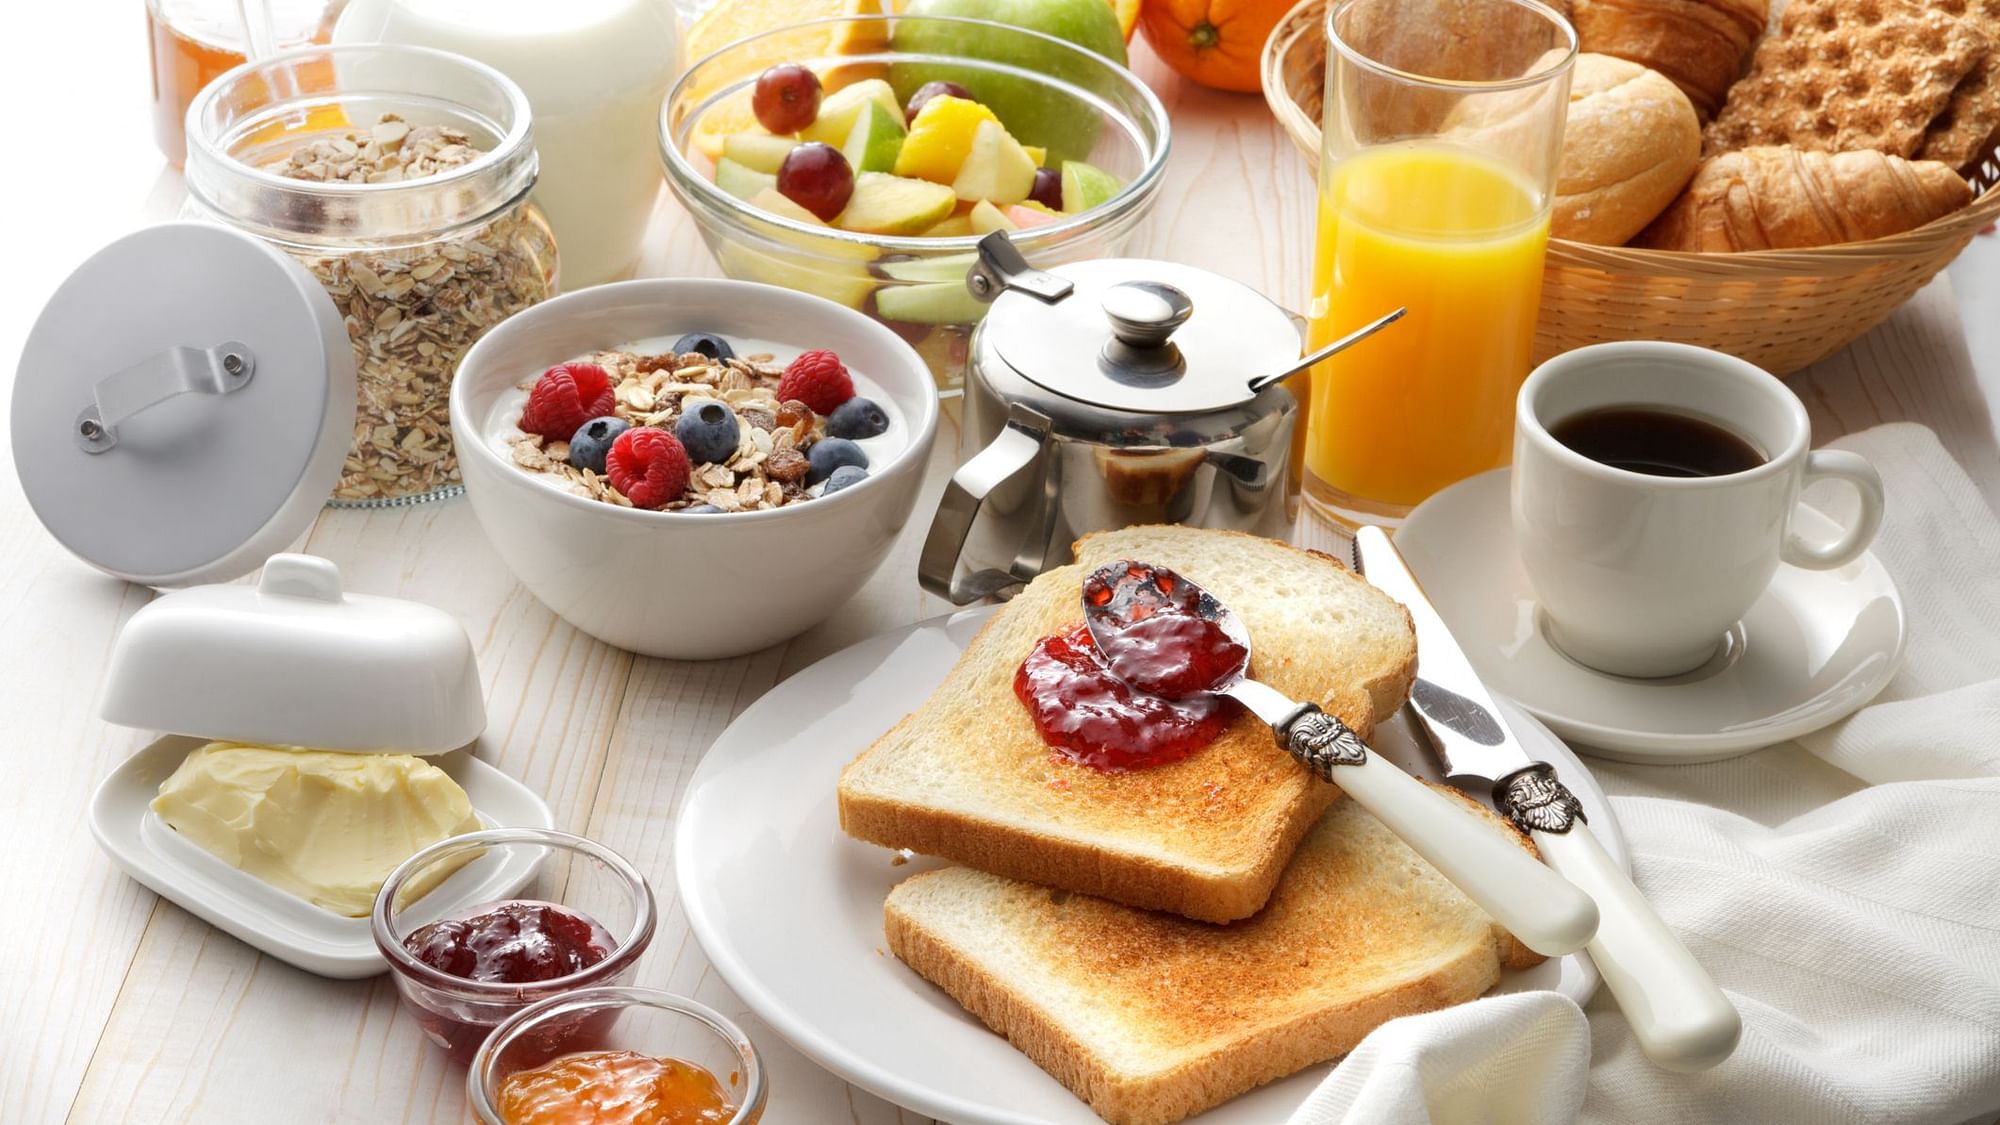 Having a busy schedule is no excuse to skip the most important meal of the day.